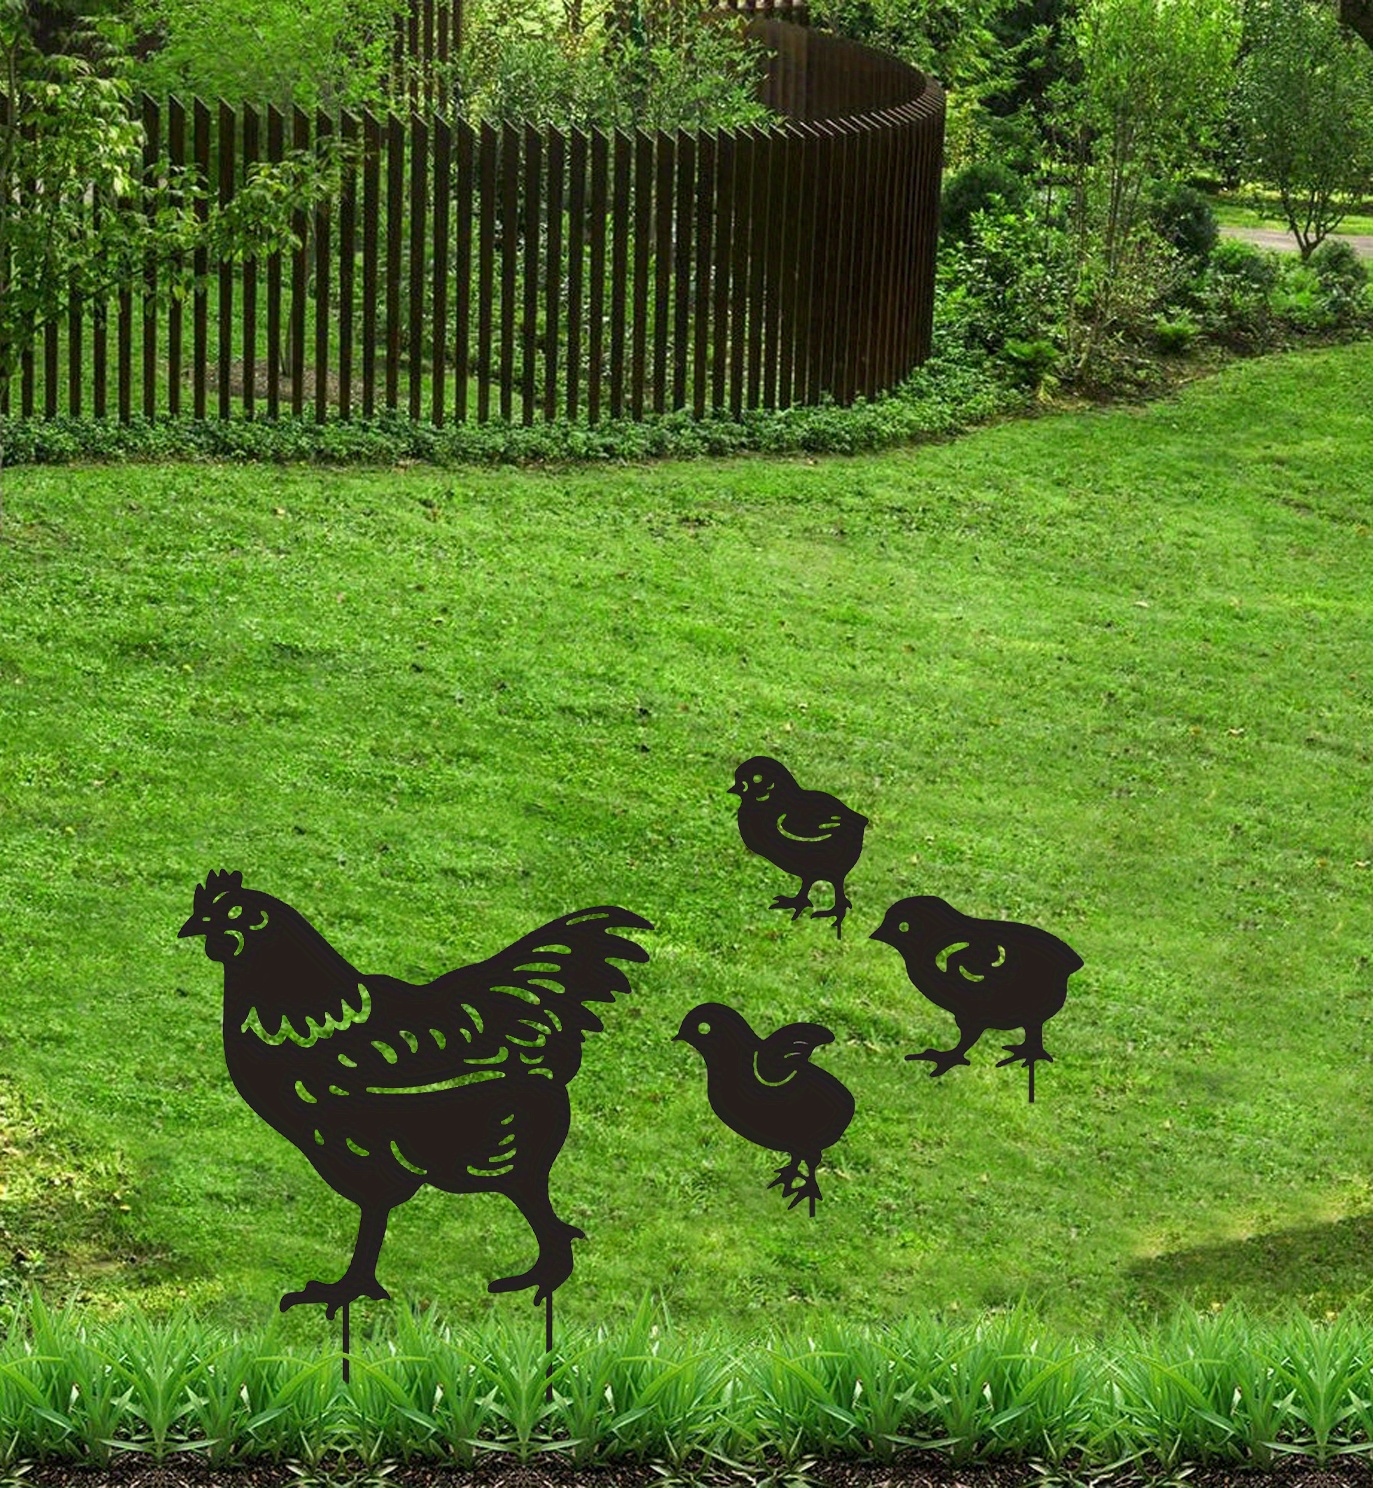 Amazon.com: Rooster Yard Decor Metal Decorative Garden Stakes - Chicken  Yard Art Rooster and Hen with Chicks Statues Idea Garden Gifts for Outdoor,  Patio, Outside - Set of 3 Lawn Decorations :